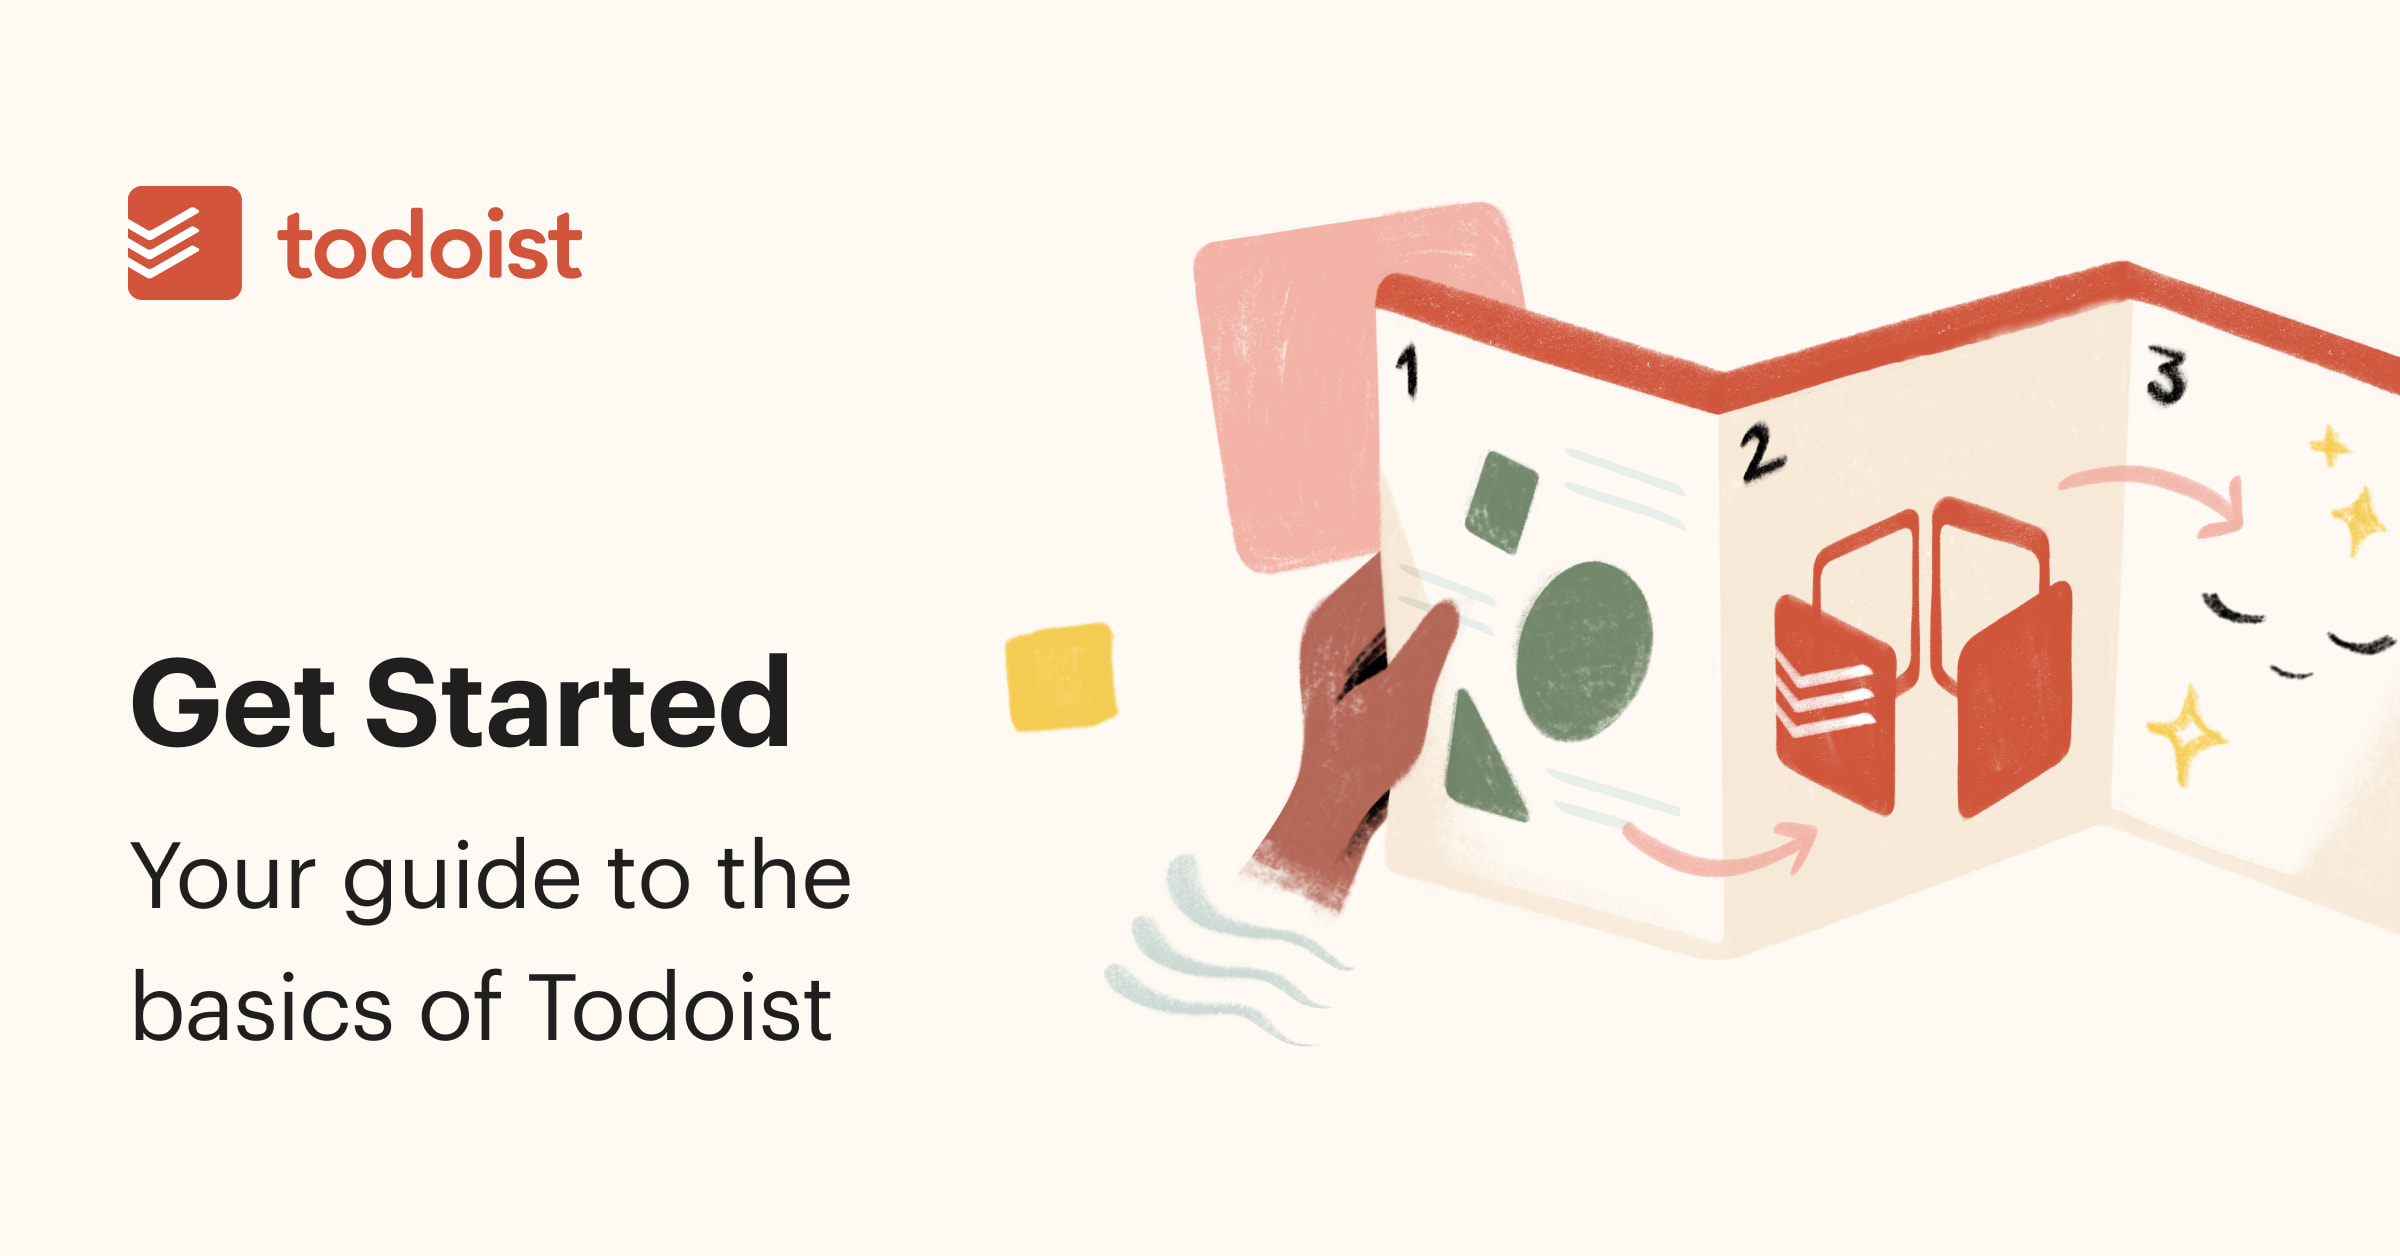 About Todoist